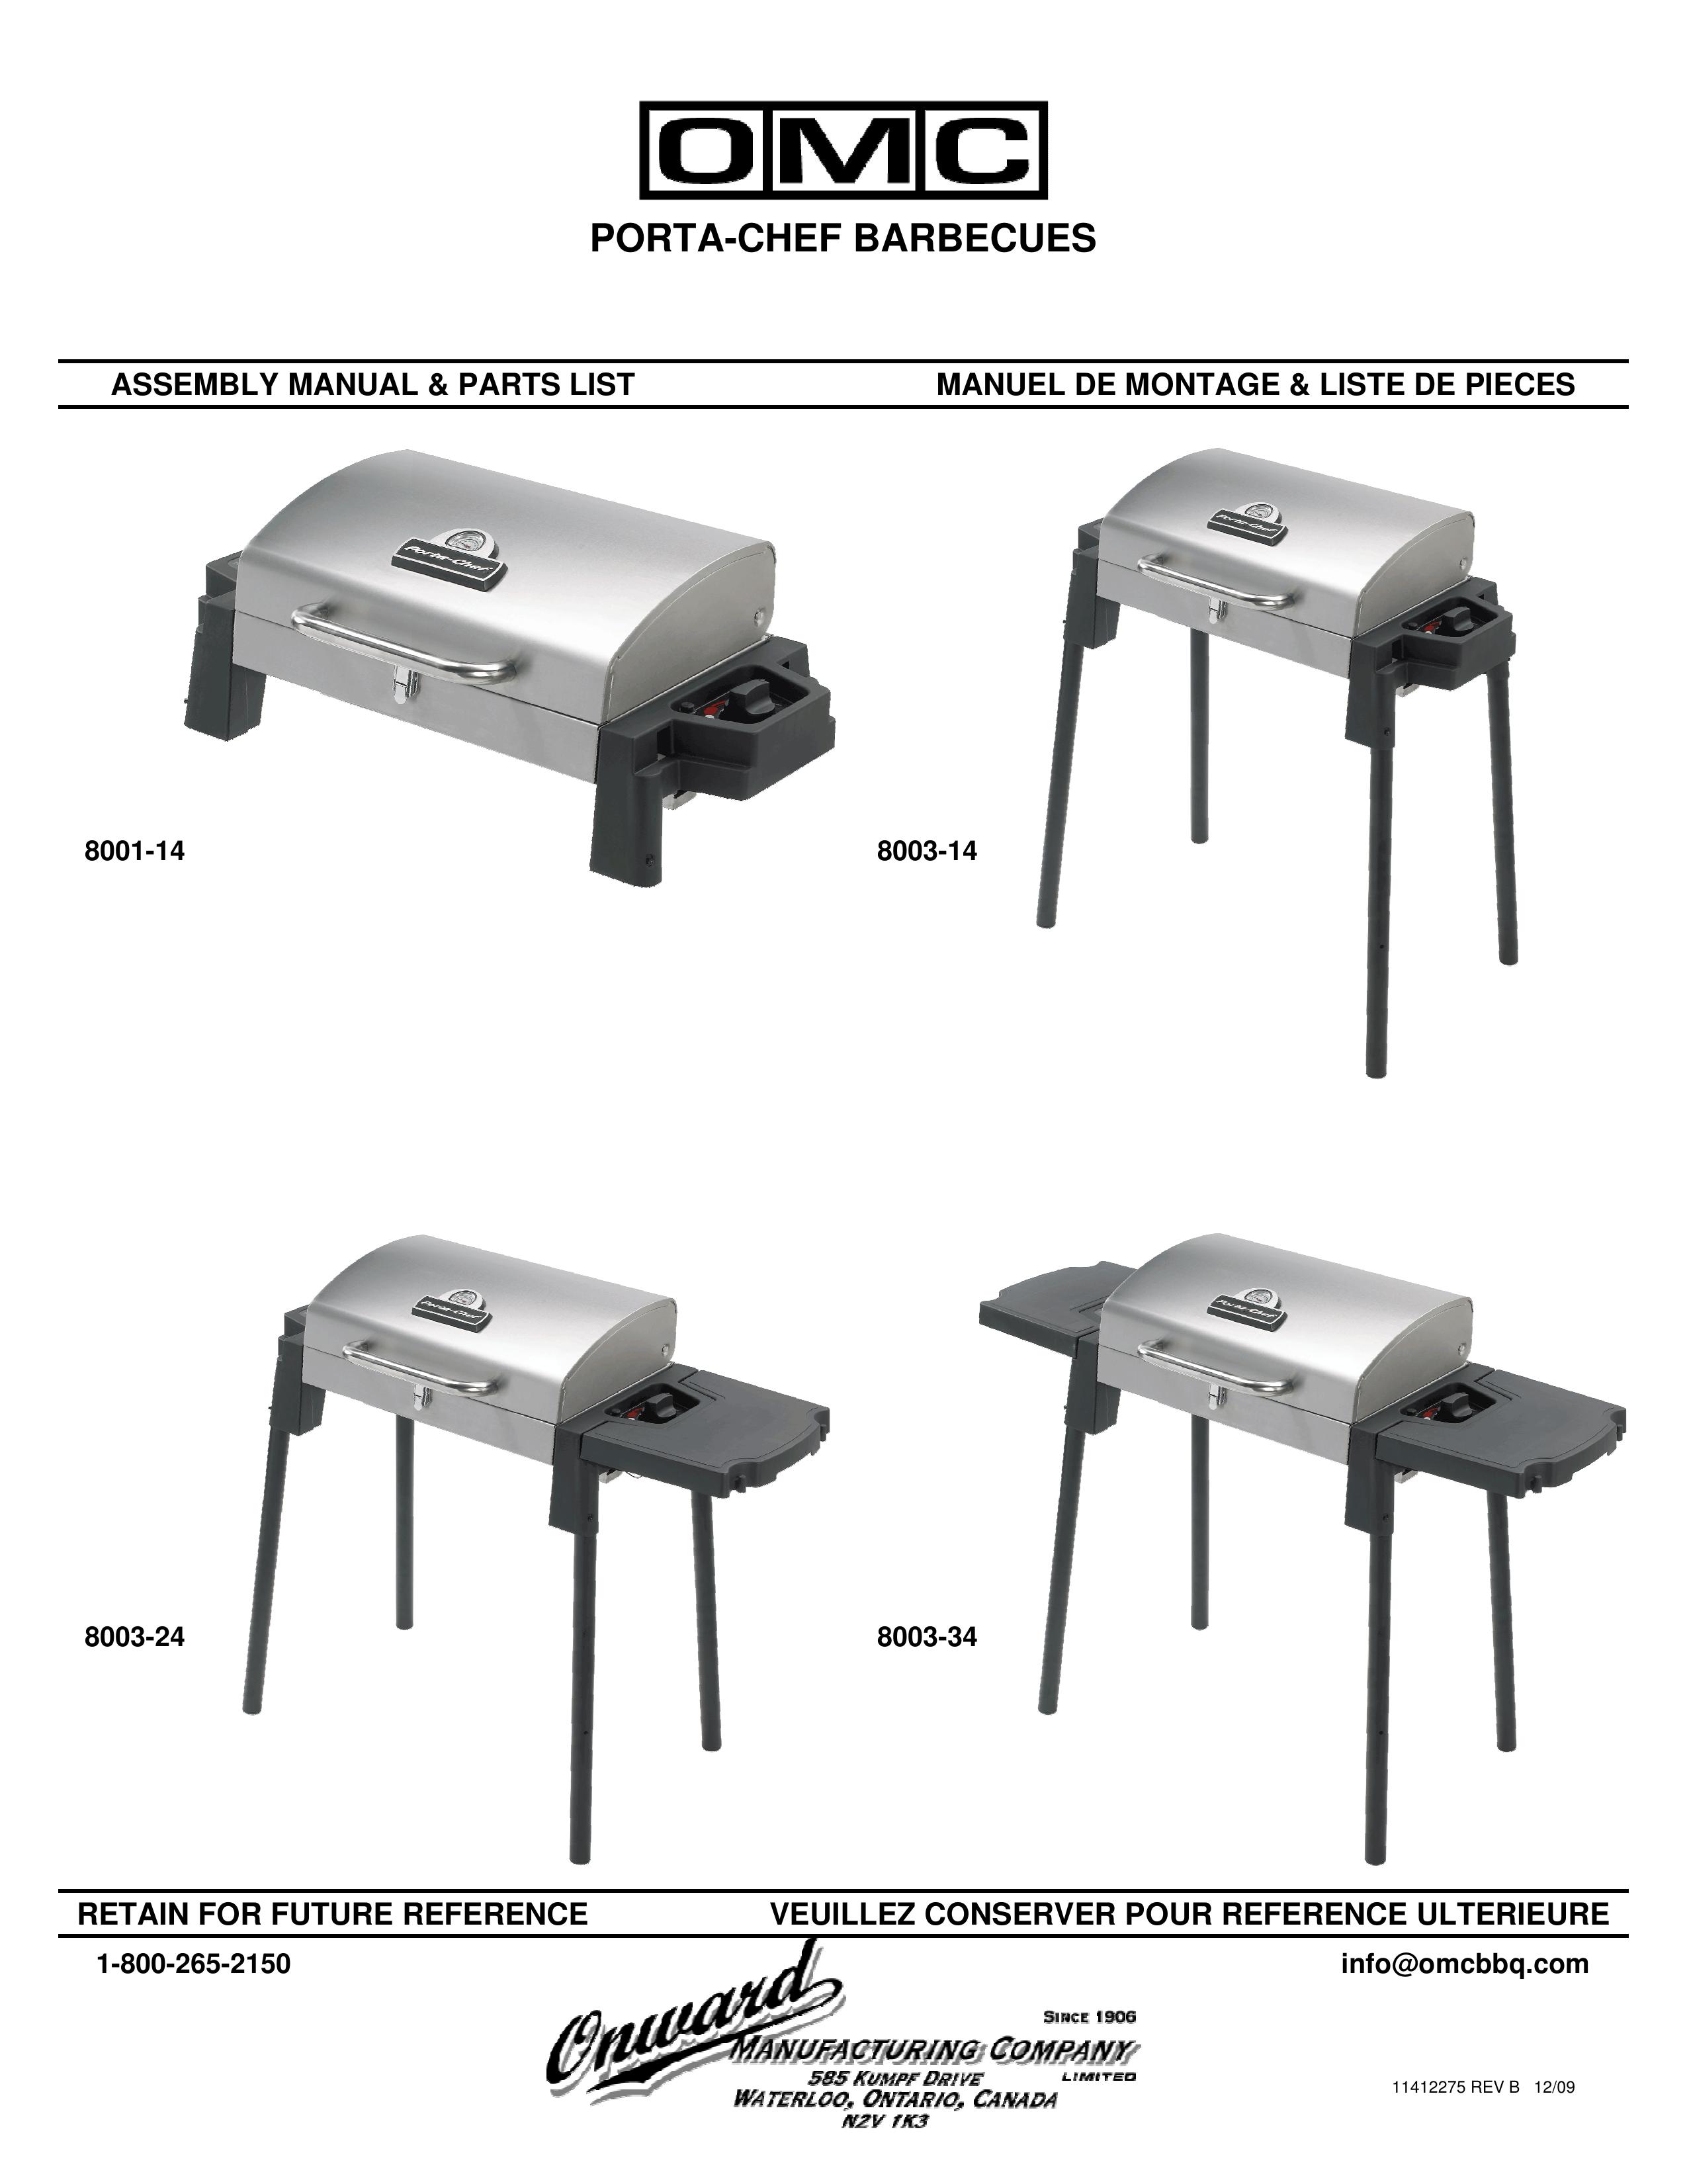 Broil King 8003-34 Charcoal Grill User Manual